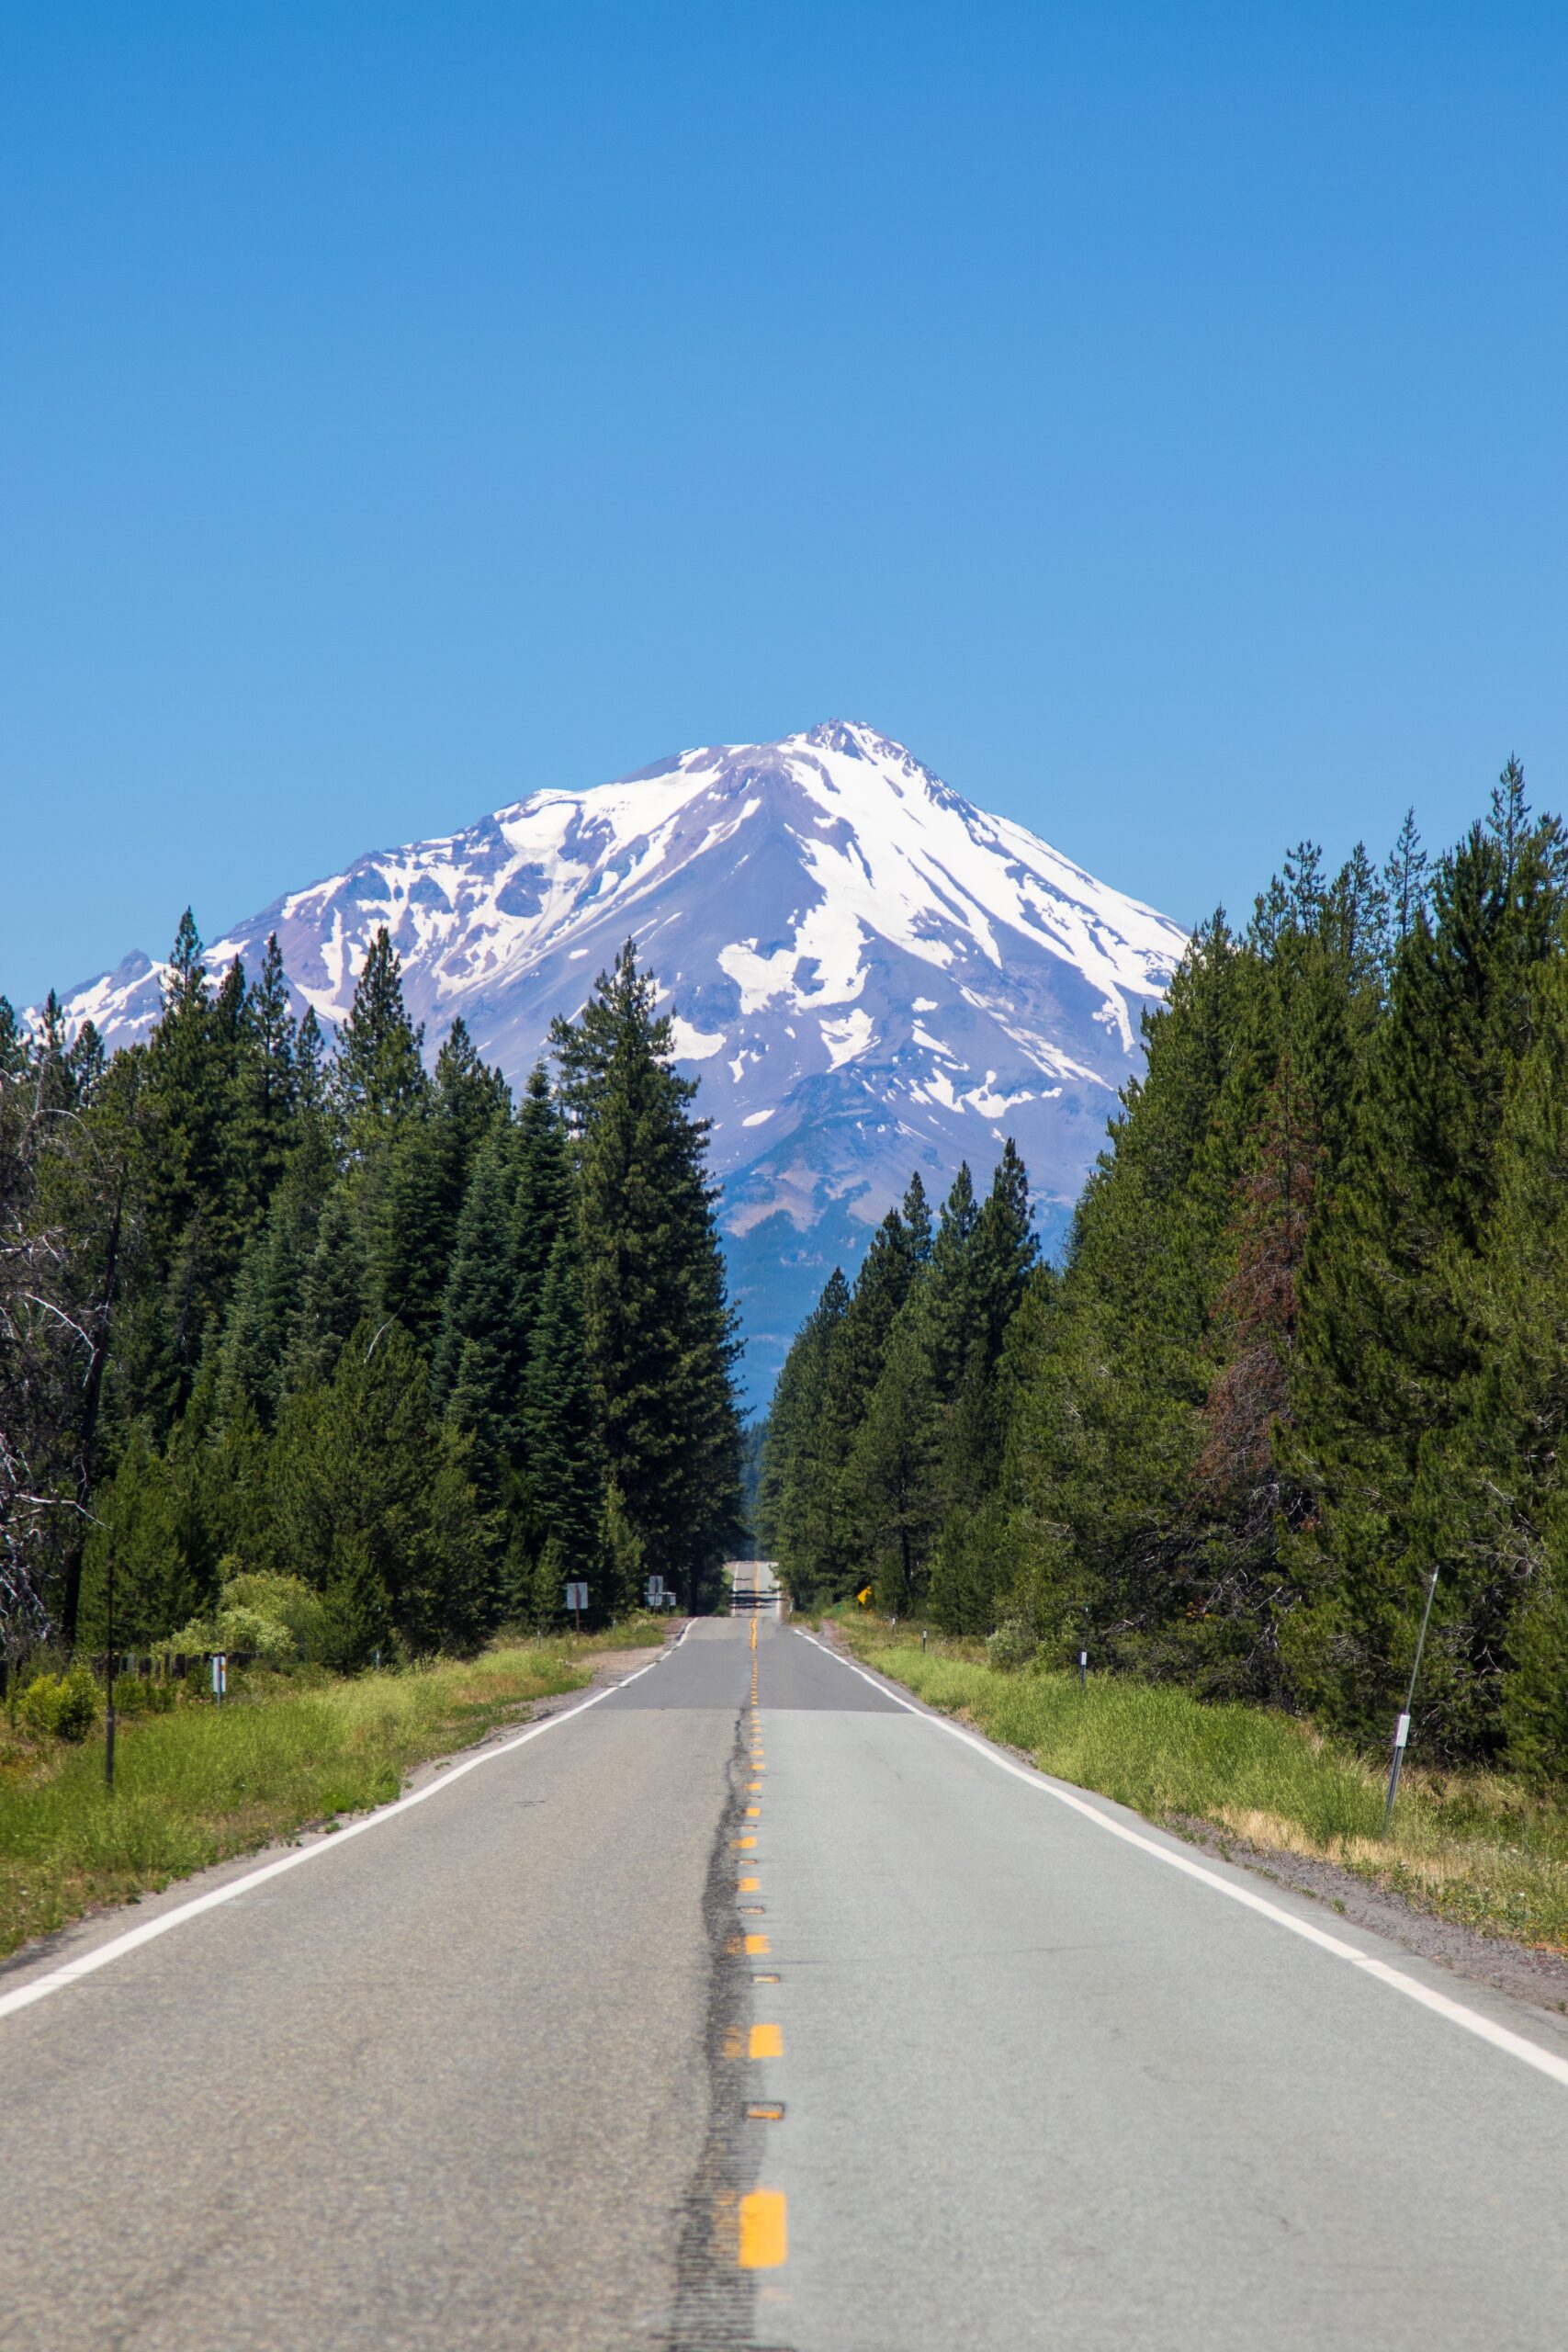 What Is The Odds Of Mt Shasta Erupting In The Next 30yrs?